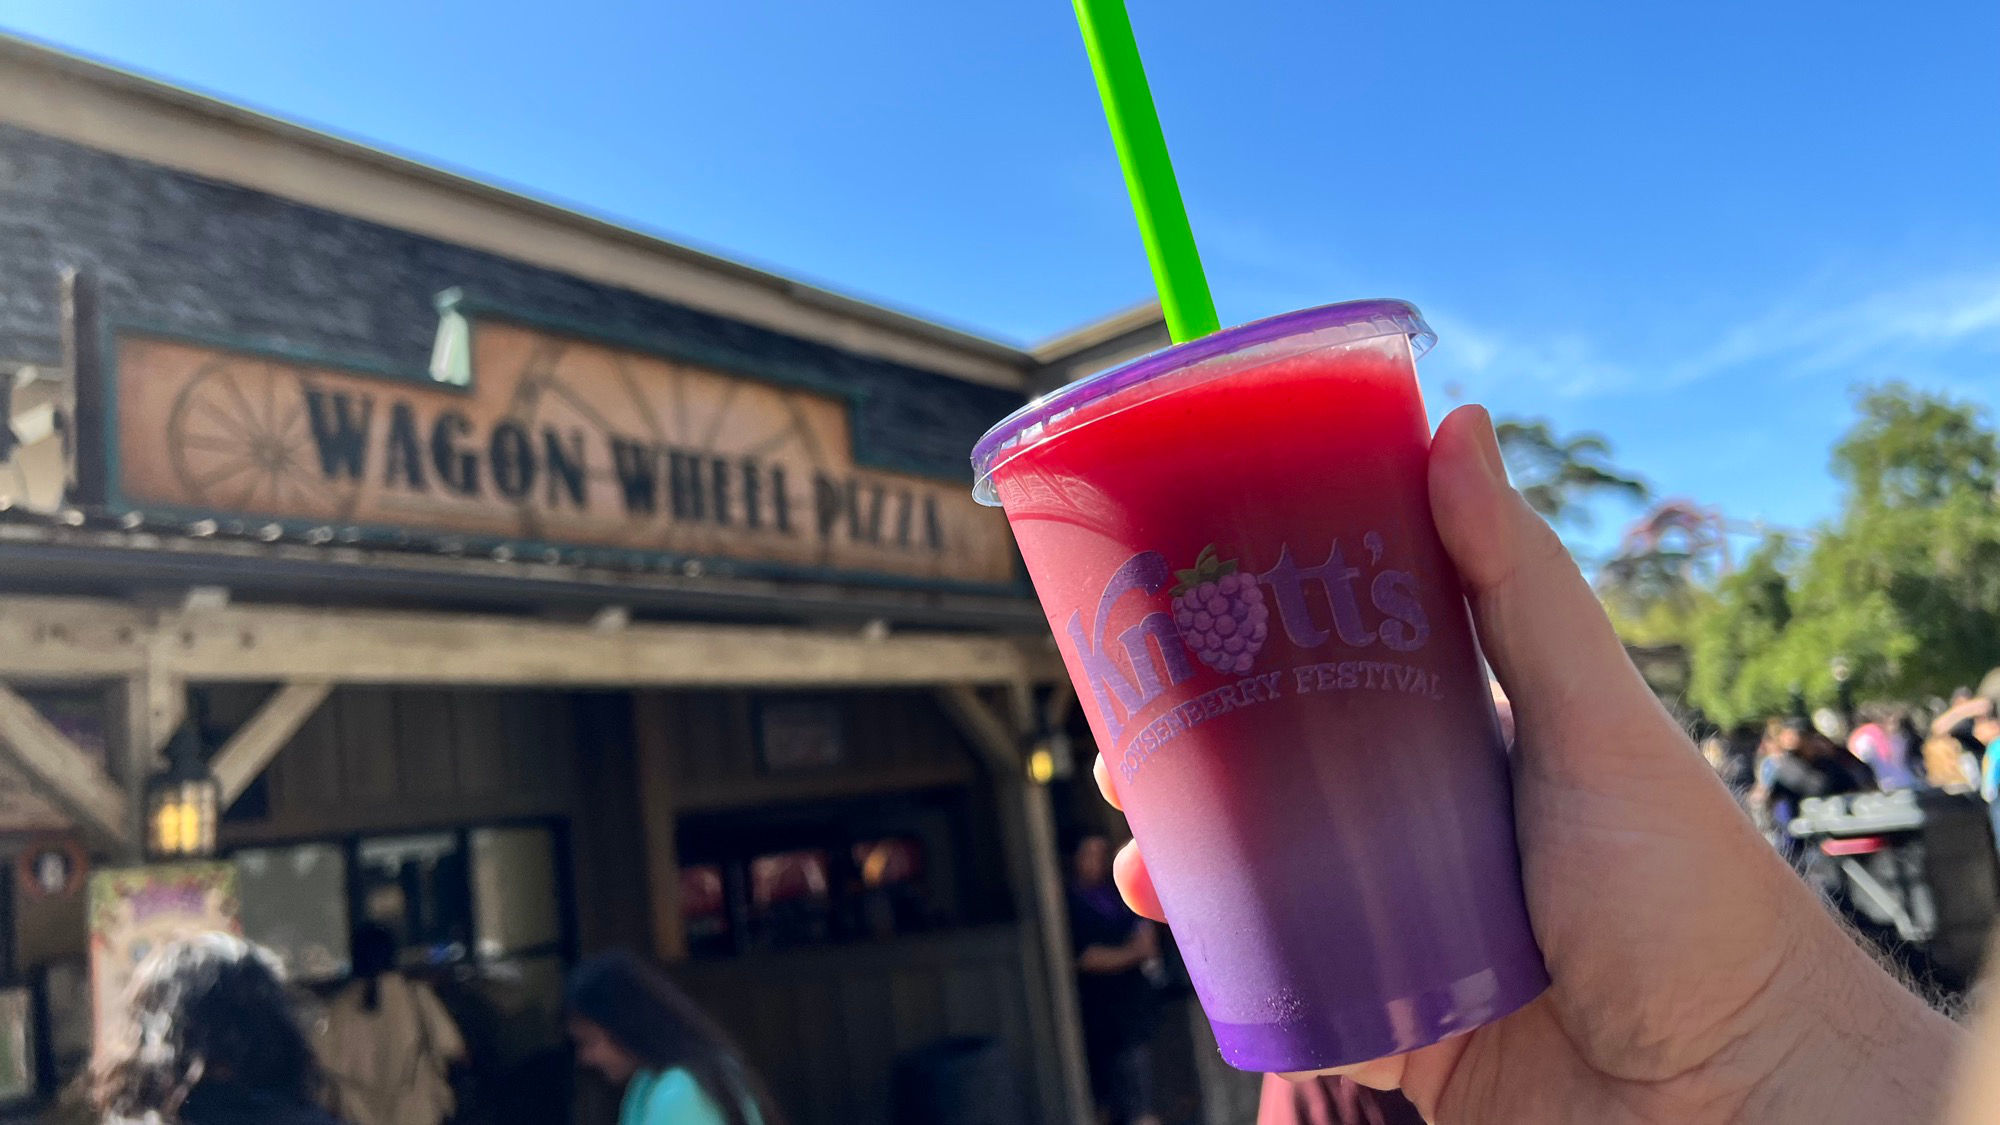 Boysenberry & Pomegranate Smoothie Available at Wagon Wheel Pizza